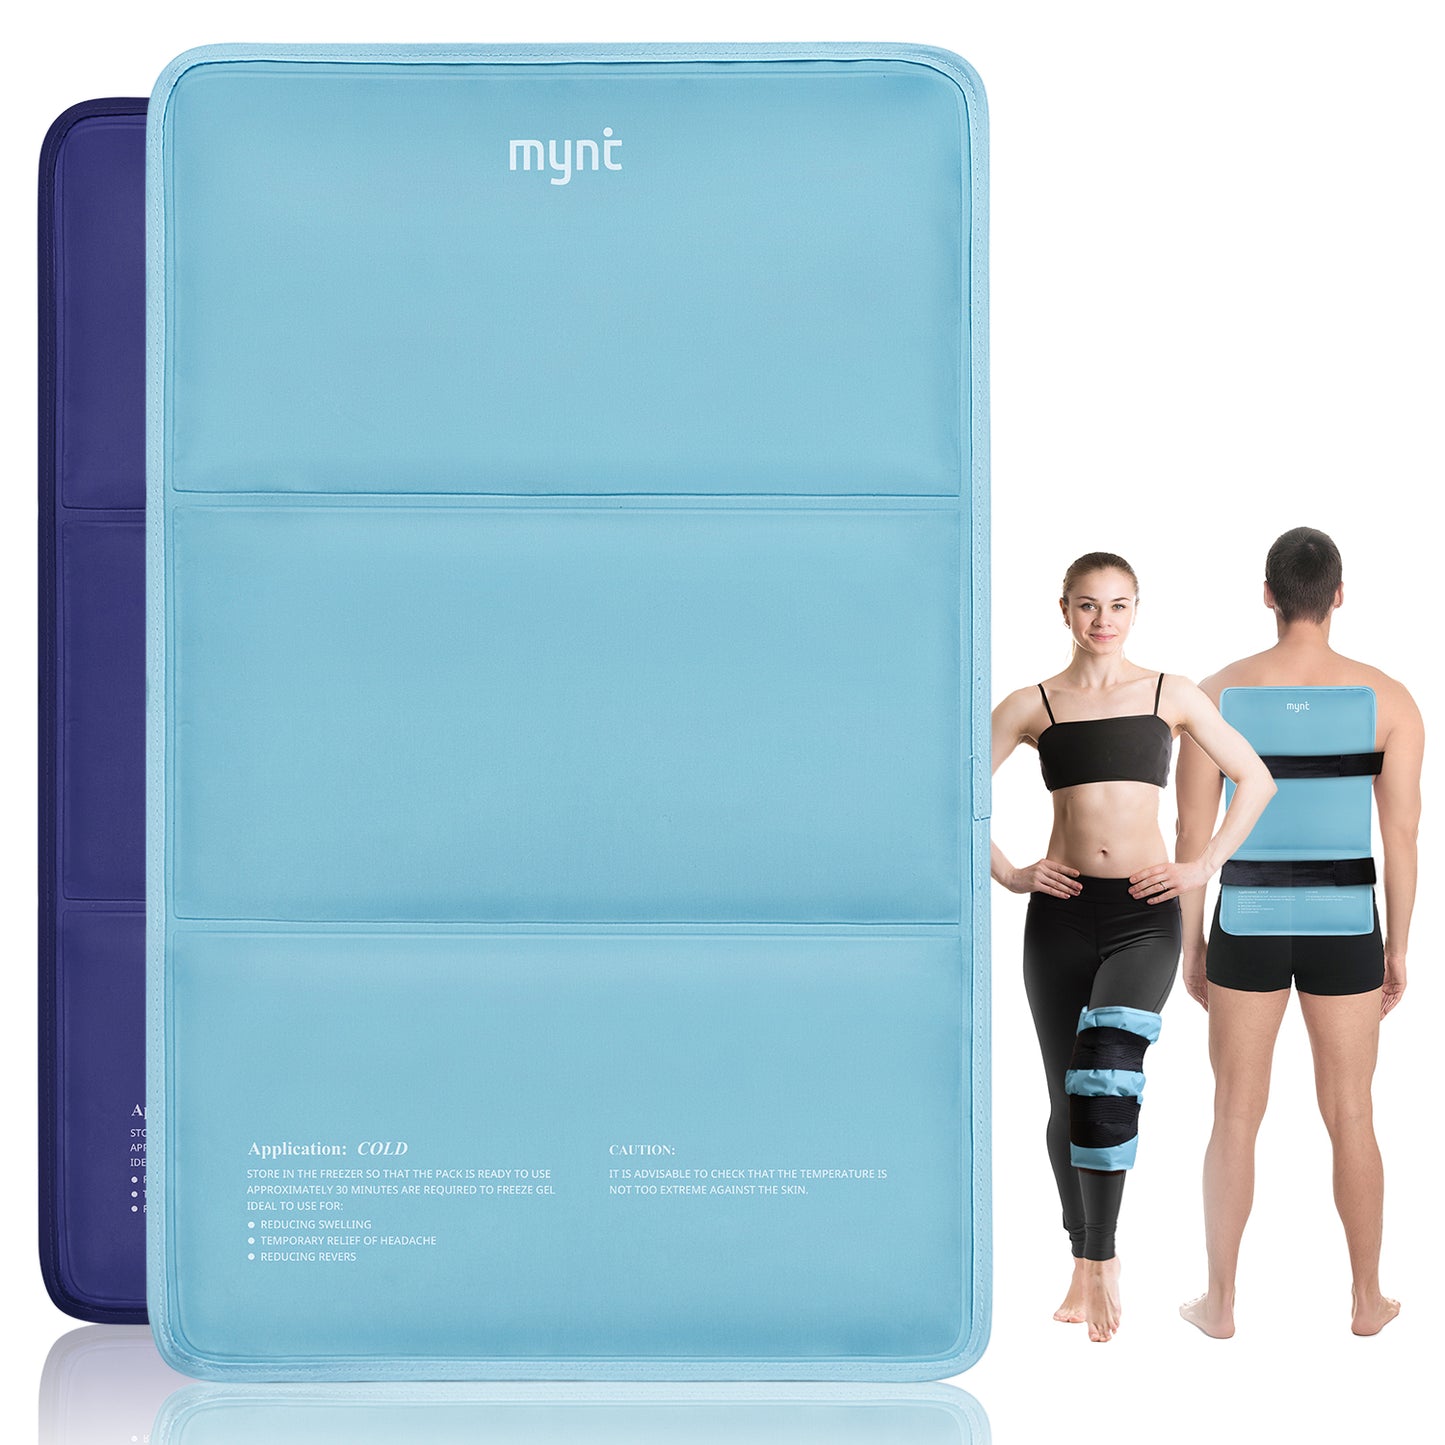 Mynt Reusable Gel Ice Pack with Large Size of 21''x13'' and 2 Adjustable Straps for Neck Shoulder Back Waist Leg Knee Ankle Injuries(Sky Blue)